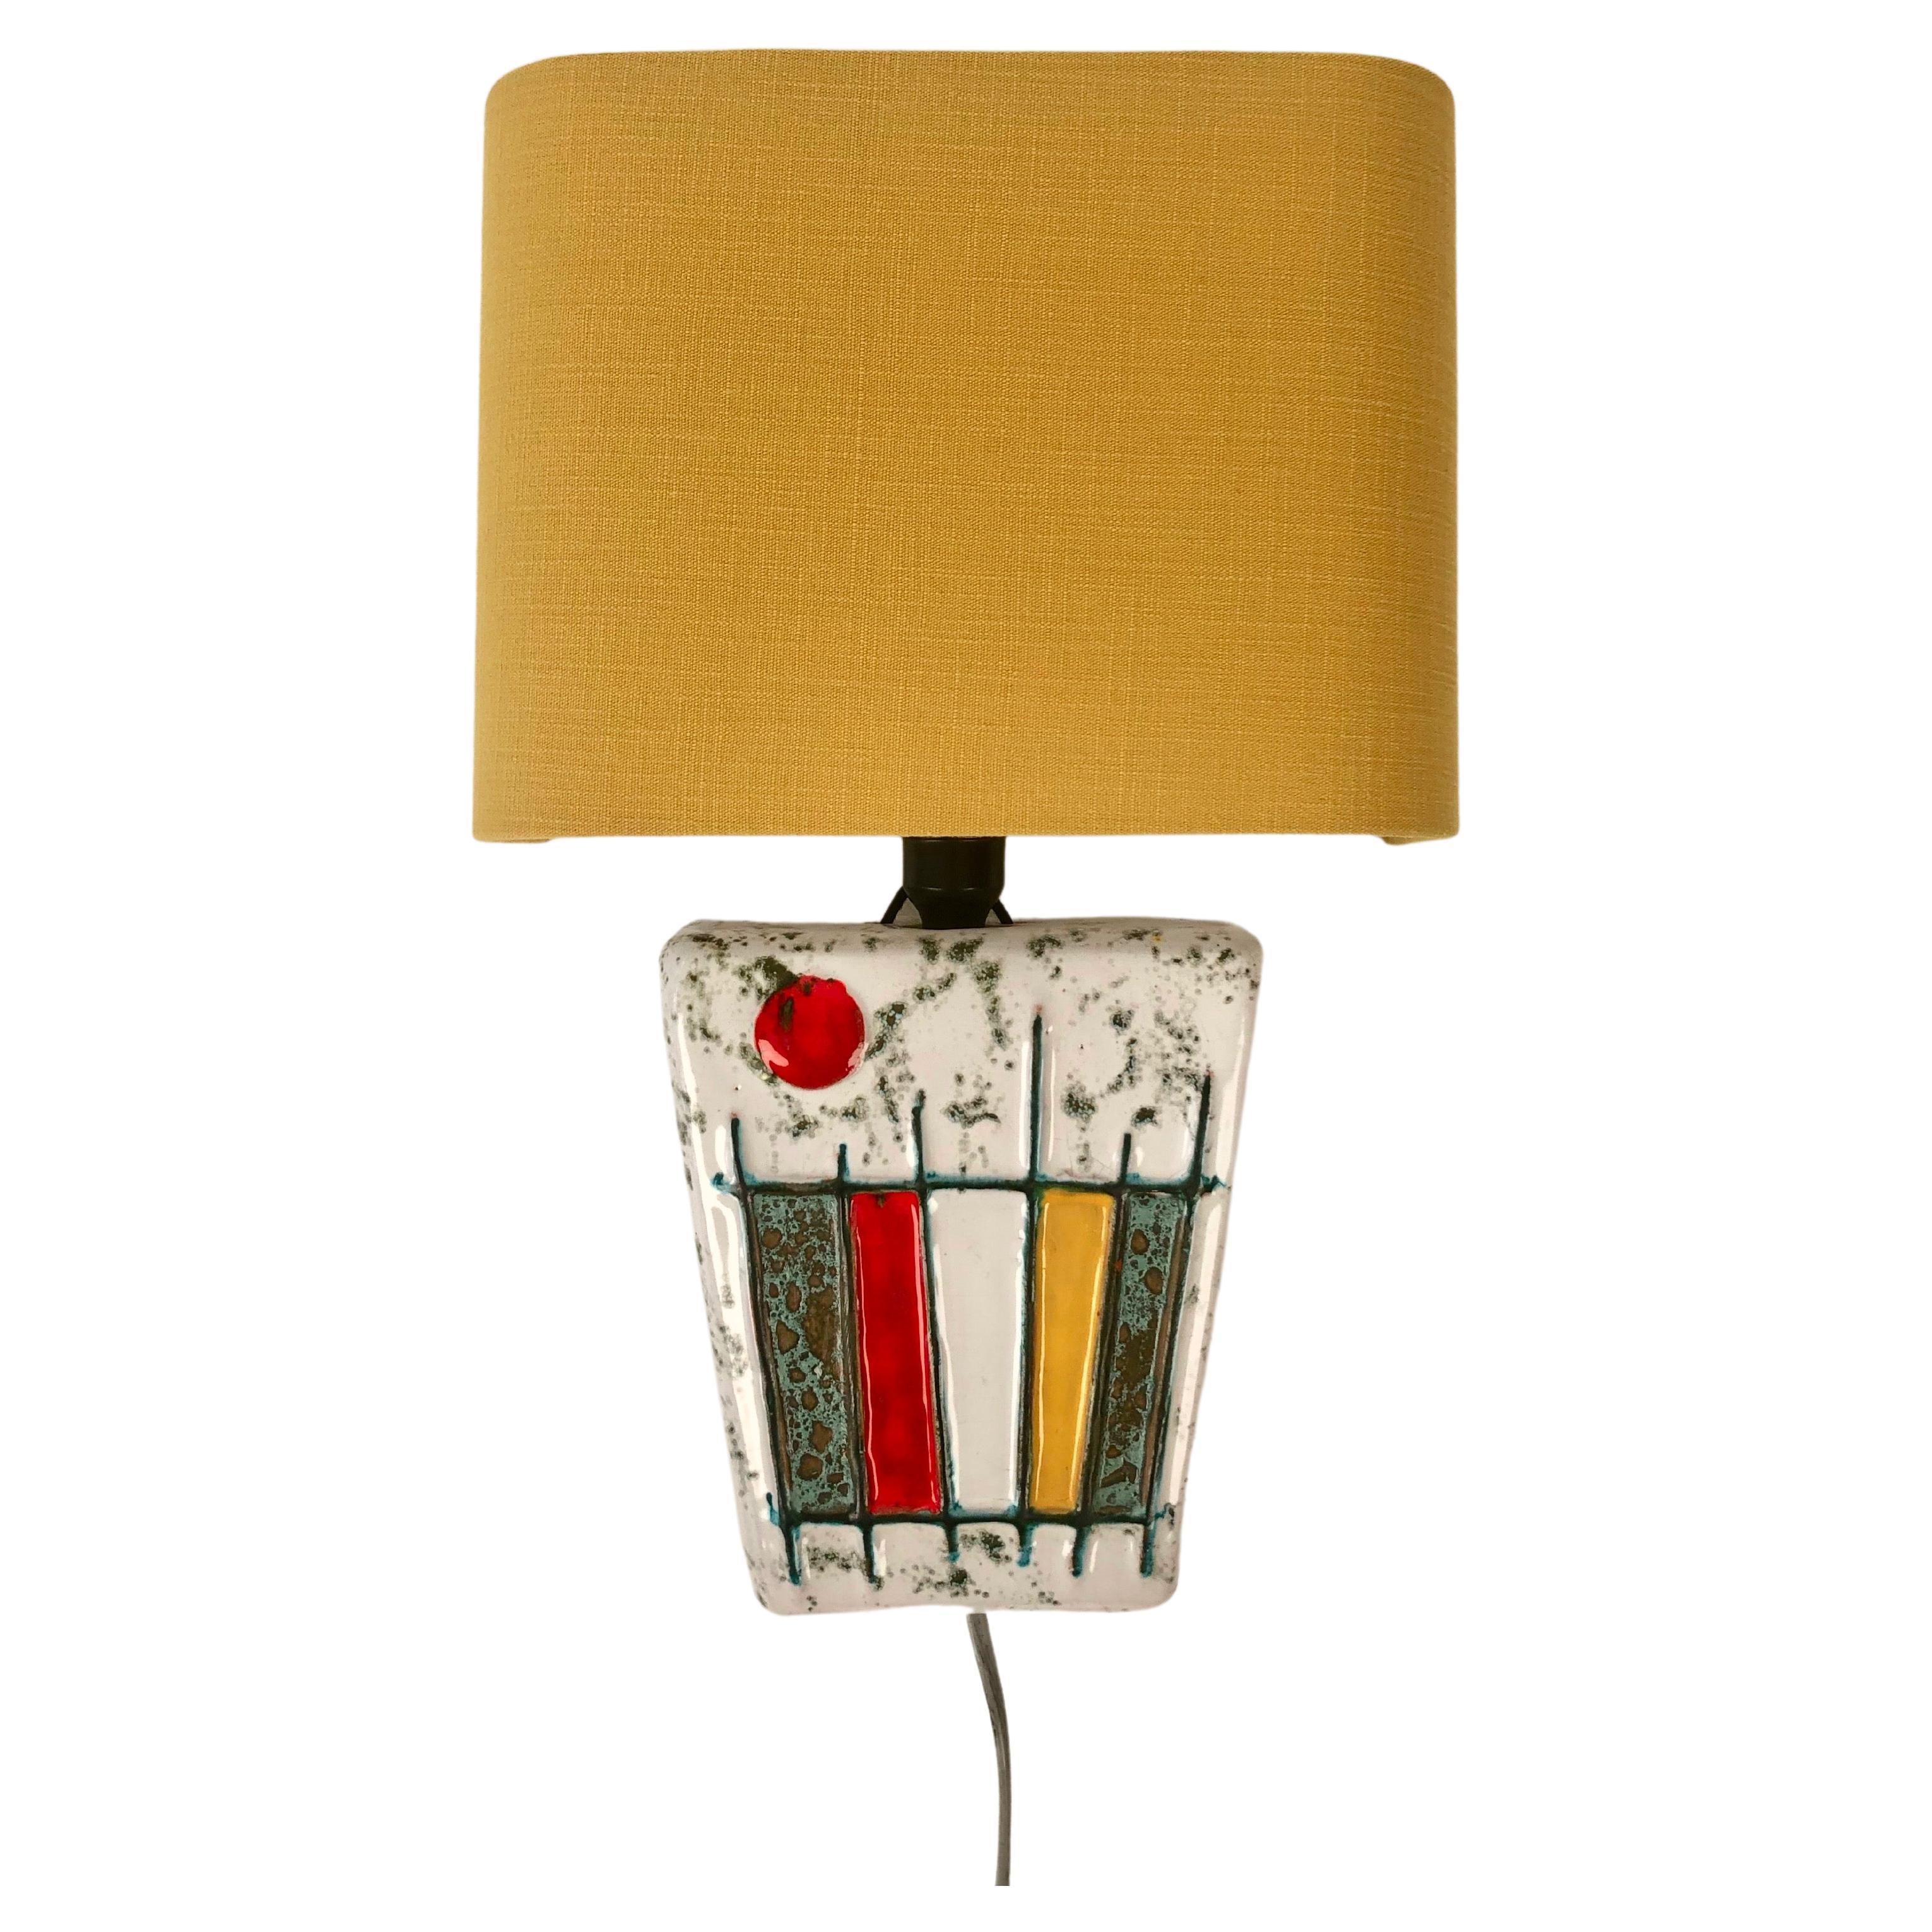 Modernist Wall Light from The Studio Ceramics Movement, 1950's, Hungary For Sale